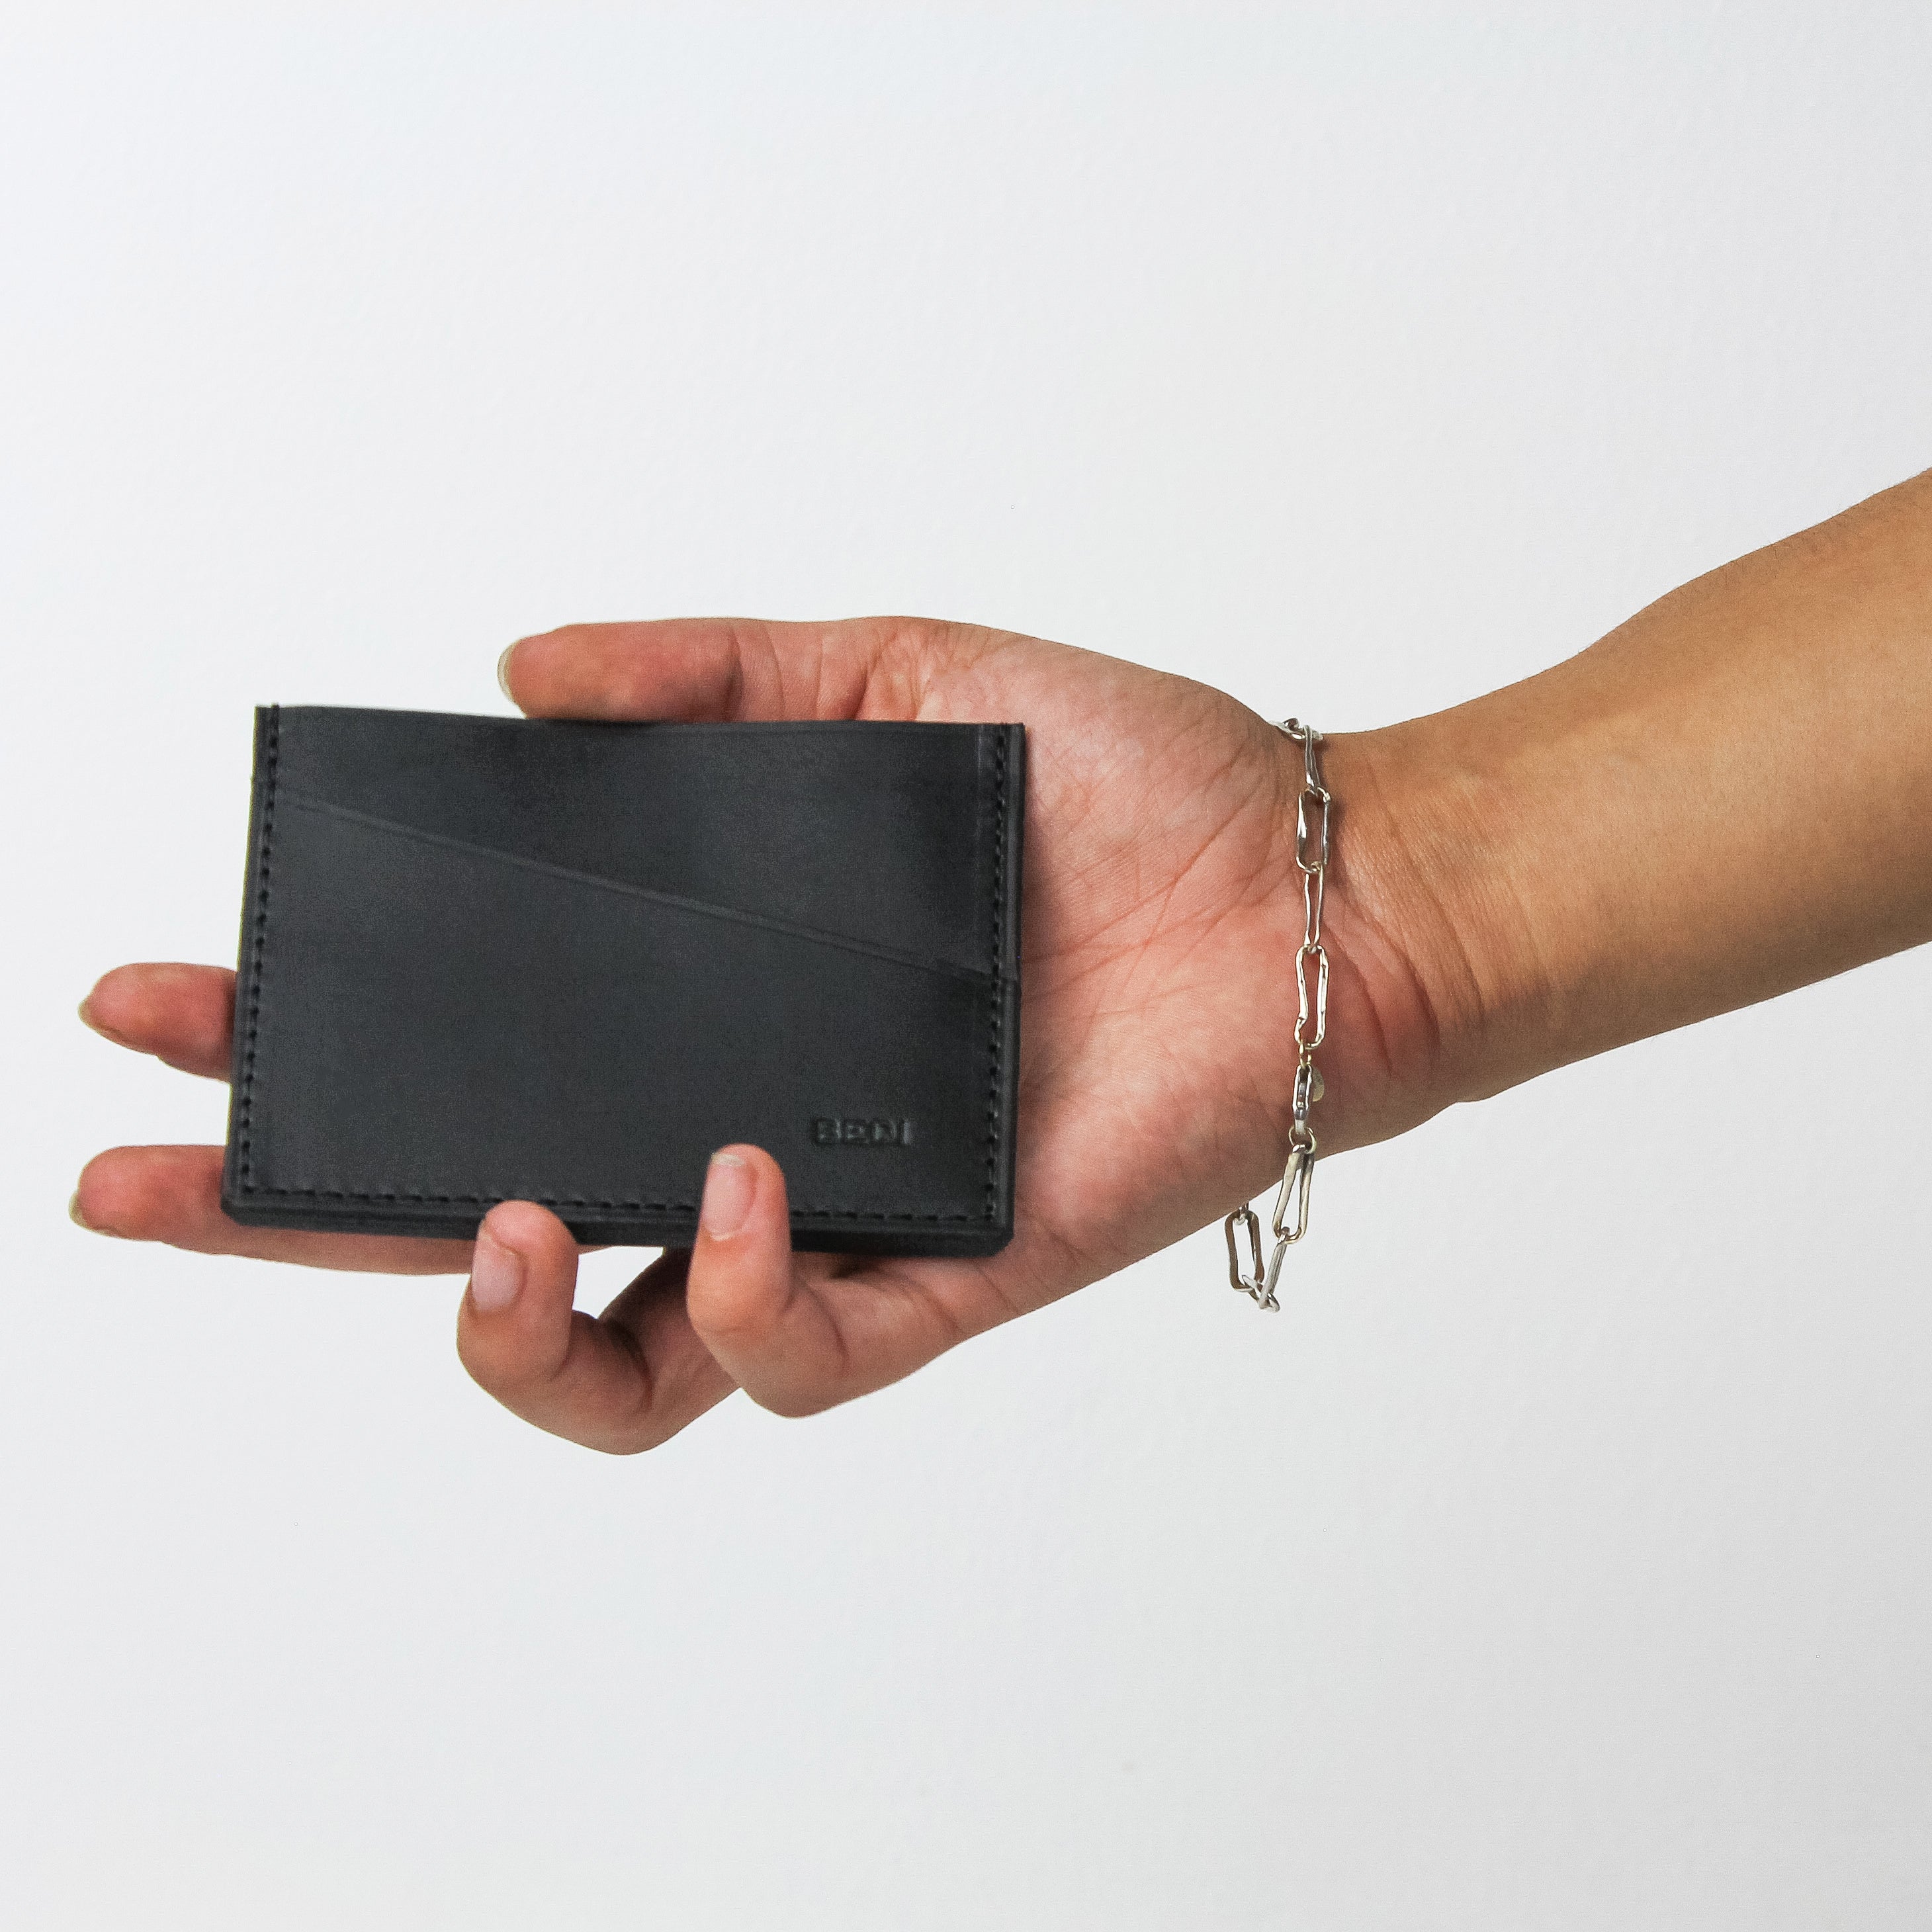 Bedi's black leather card holder held in a woman's hand